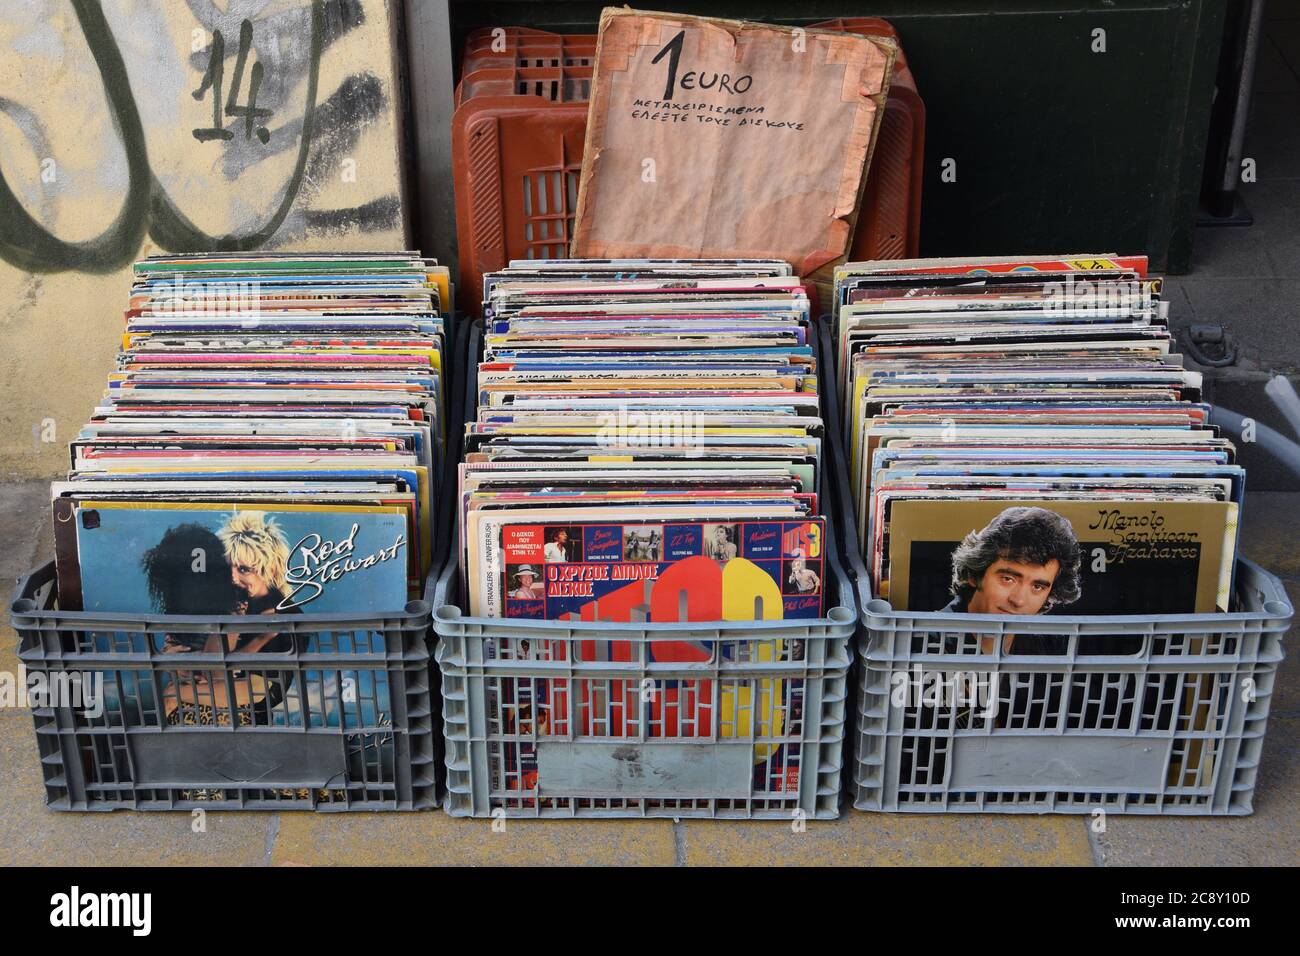 Athens, Greece - April 27, 2015: Plastic crates with used records at street market. Old vinyl albums one dollar bin with sign urging to check conditio Stock Photo